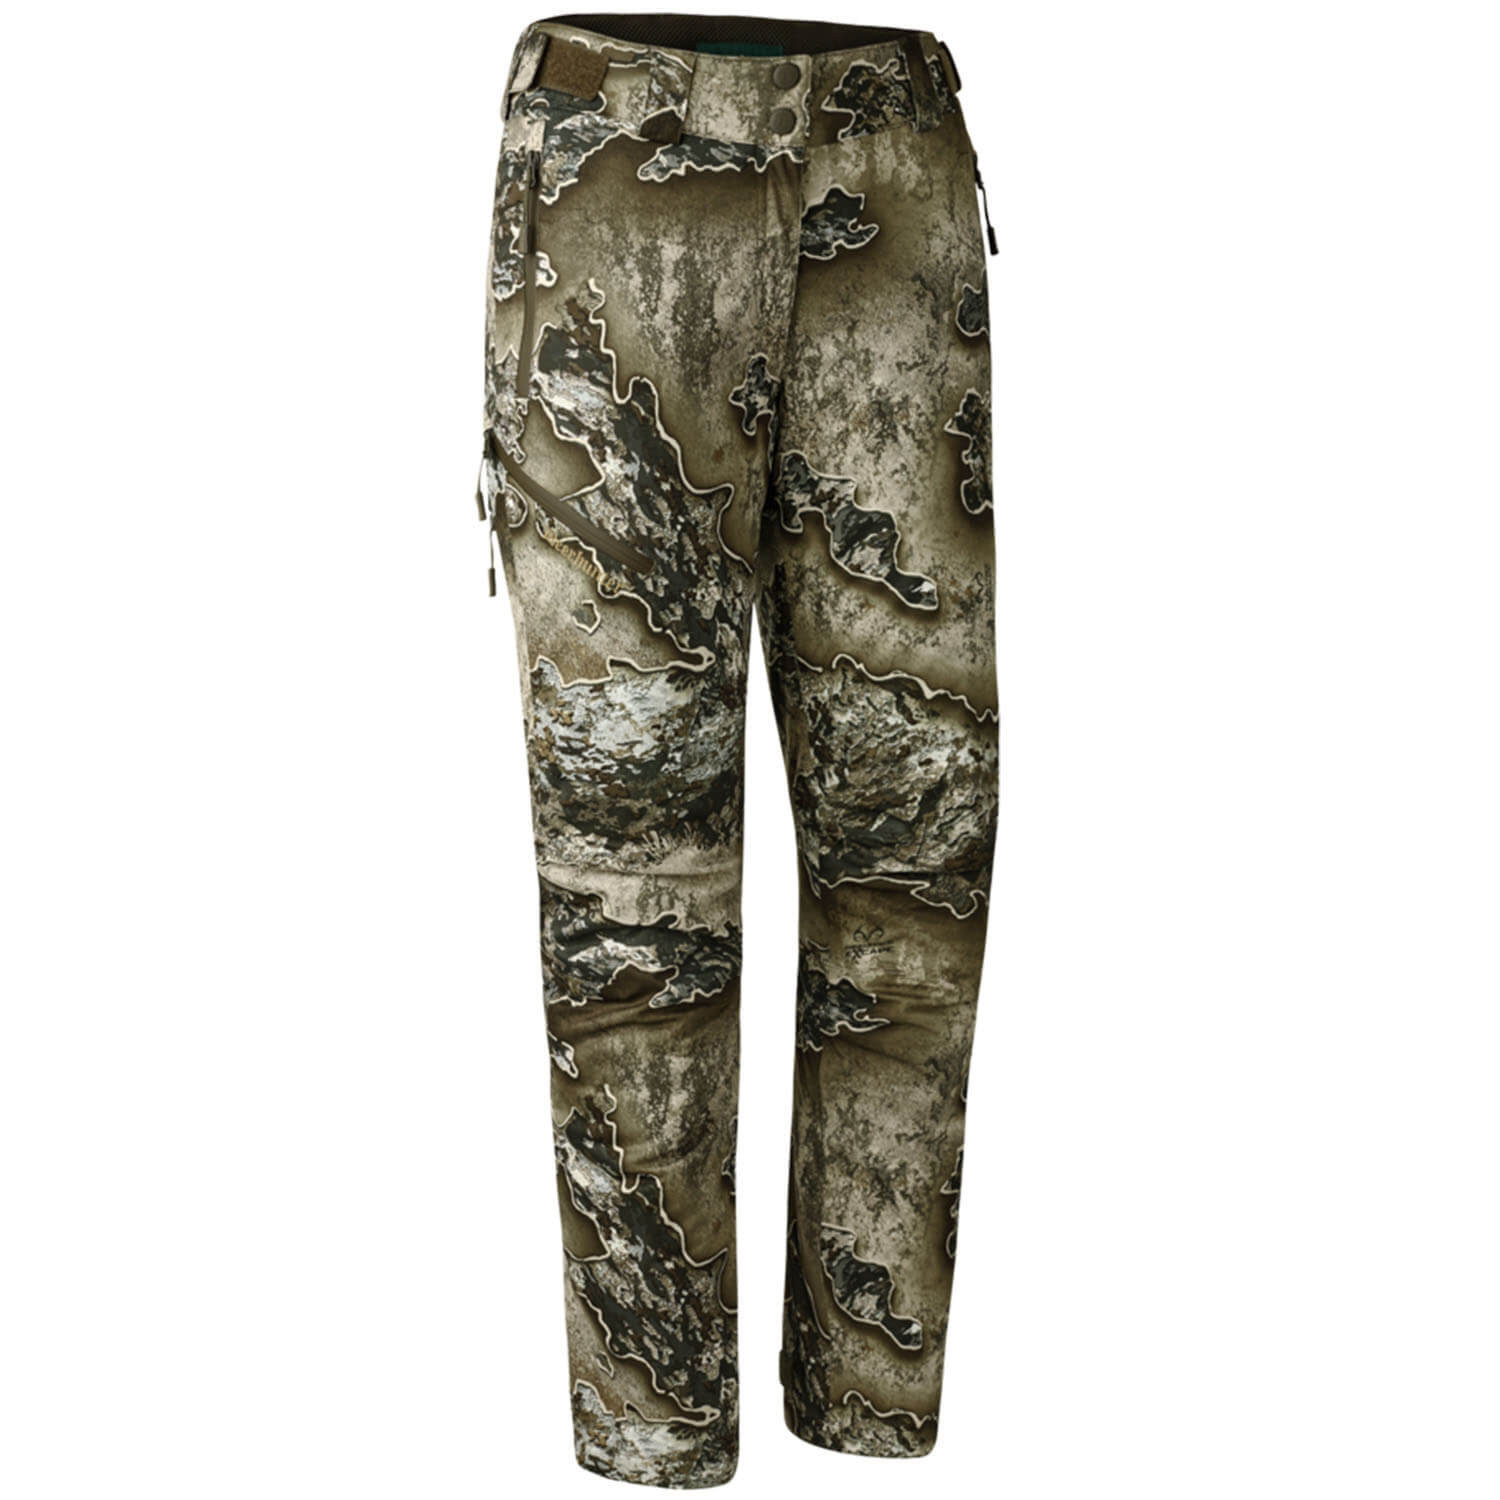 Deerhunter winter Trousers Lady Excape (realtree excape) - For Ladies